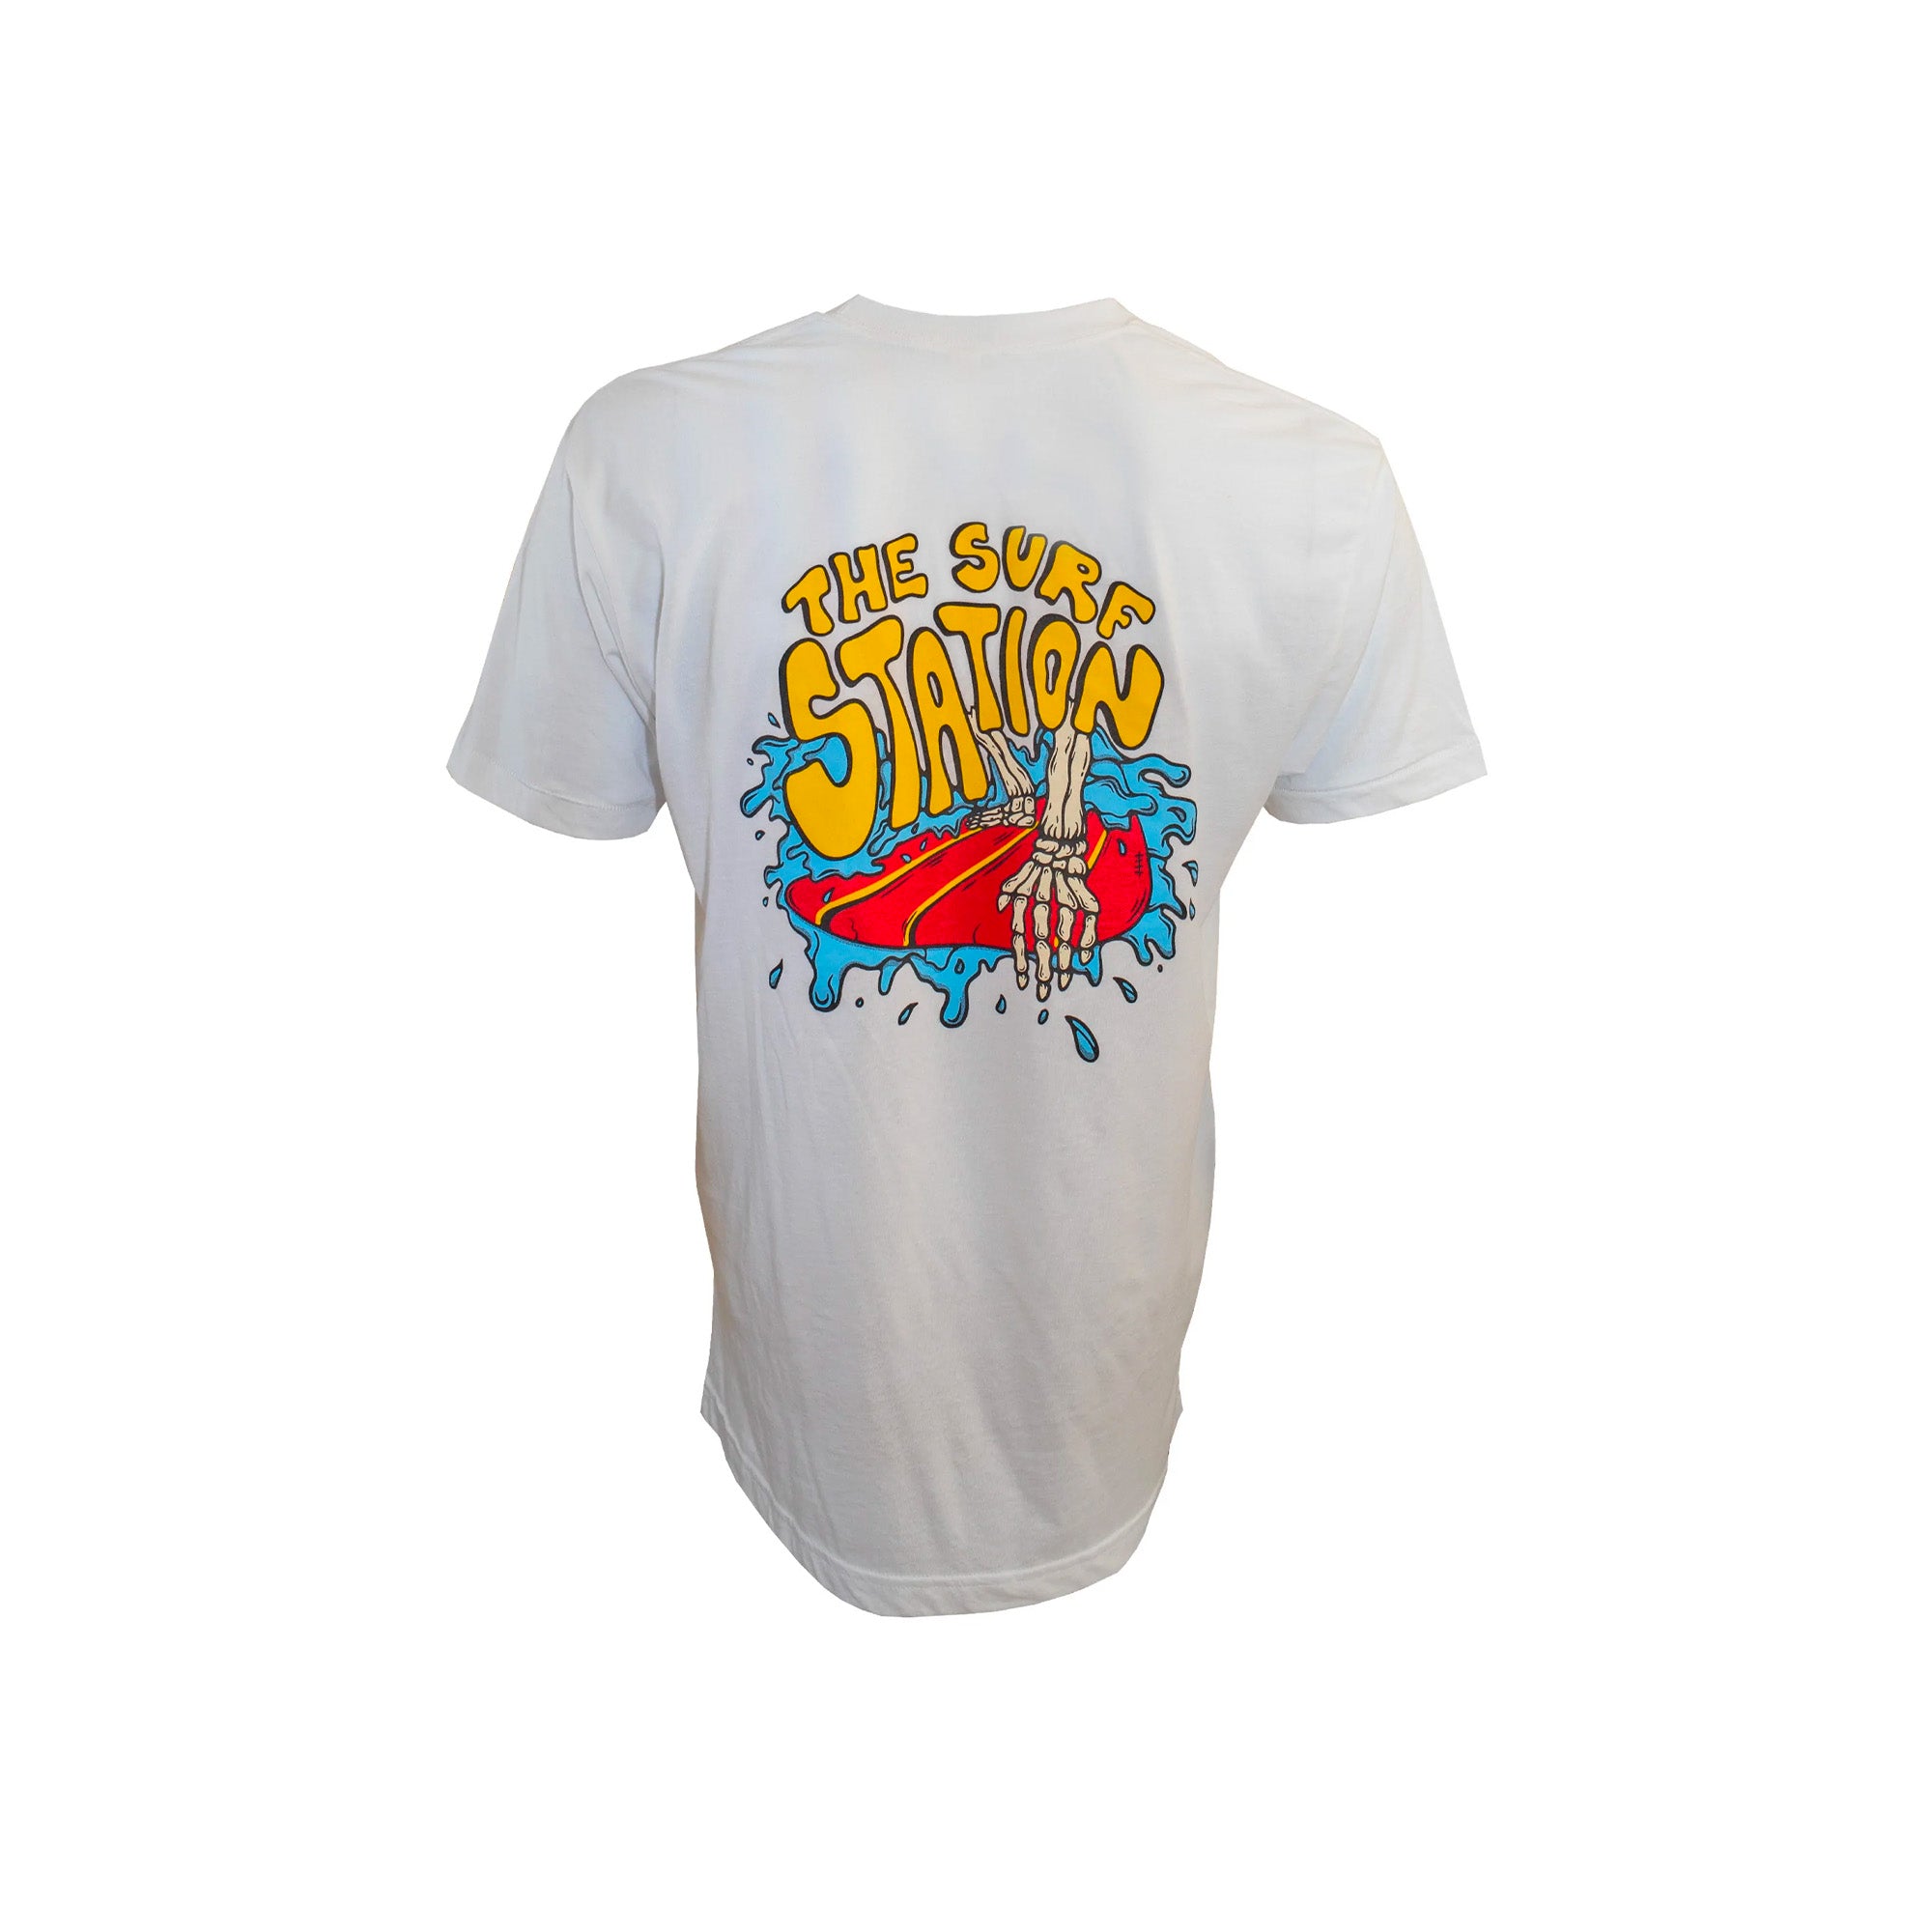 Surf Station Cheater 5 Youth Boy's S/S T-Shirt